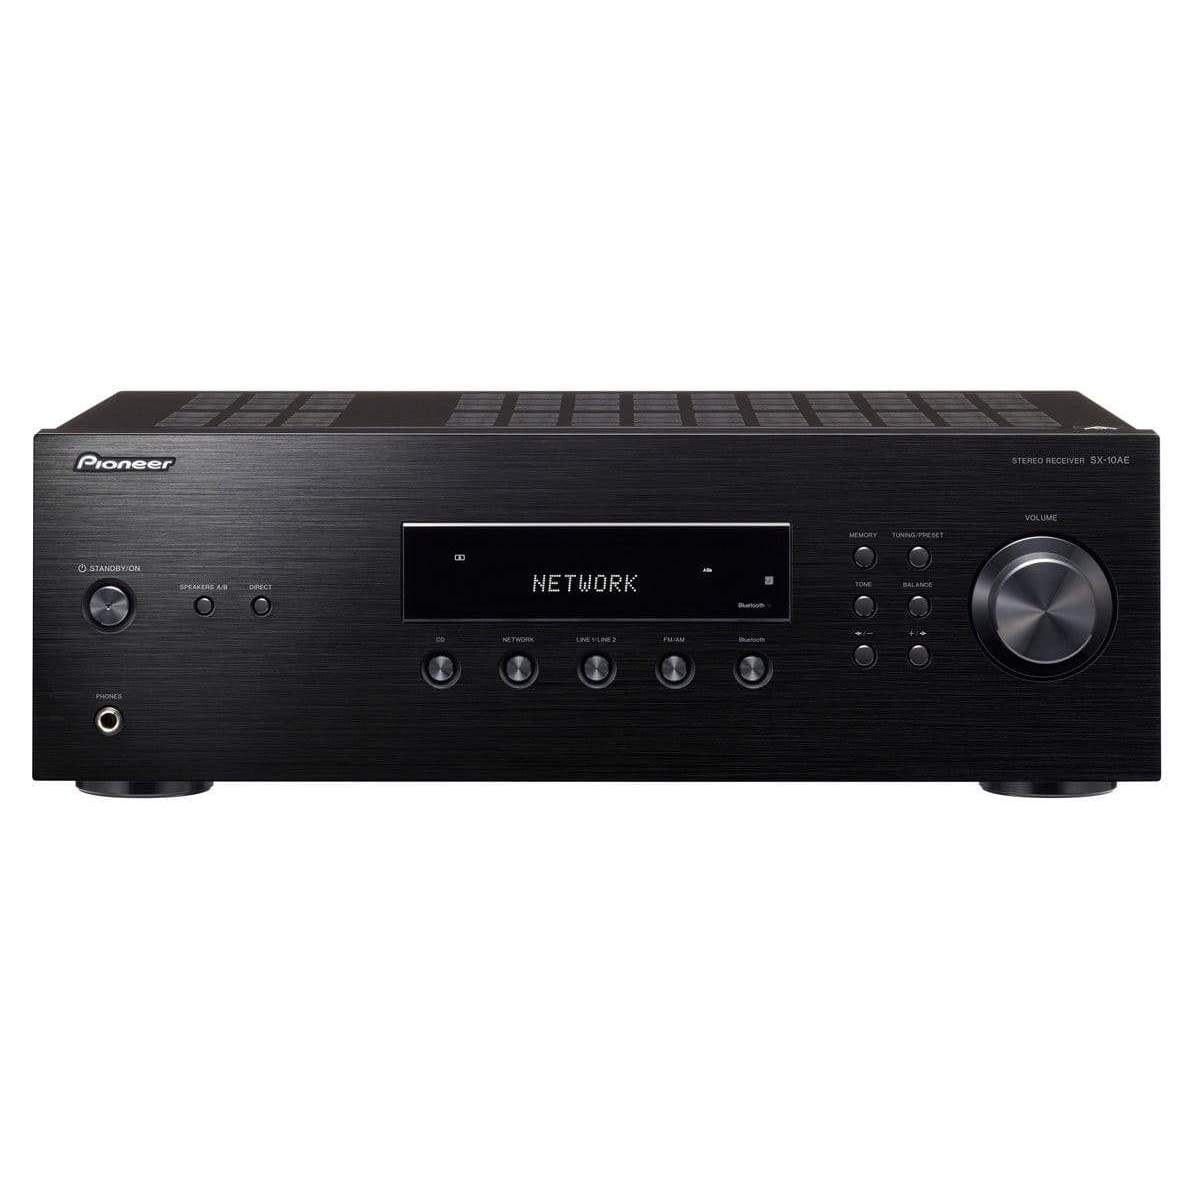 Pioneer Pioneer SX-10AE Stereo Receiver 100W / ch Bluetooth Streaming Amplifier Receivers & Amplifiers